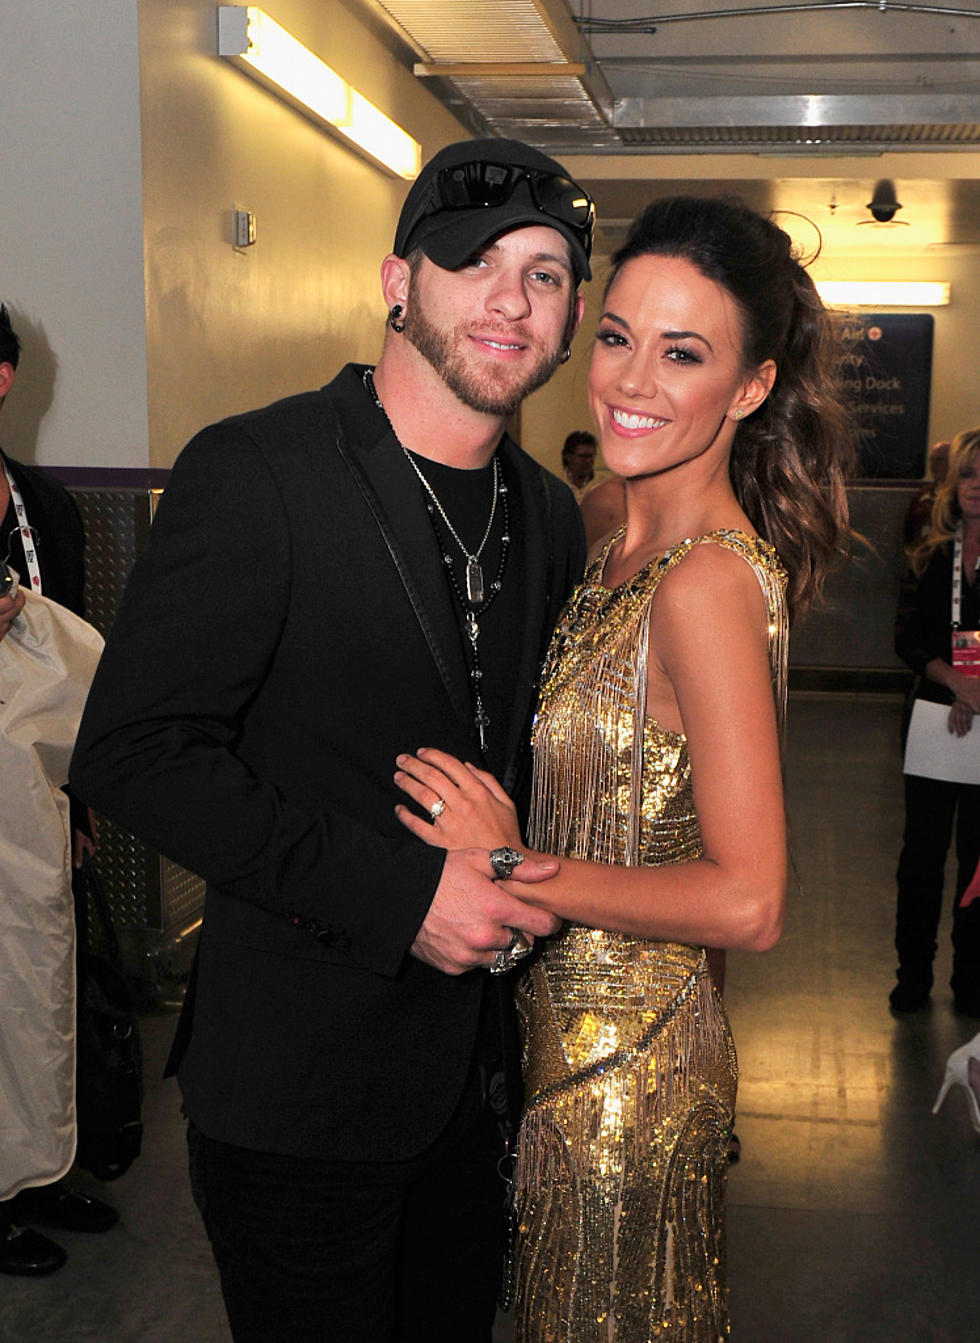 LISTEN: How Brantley Gilbert Maintains A Relationship With Jana Kramer While On The Road